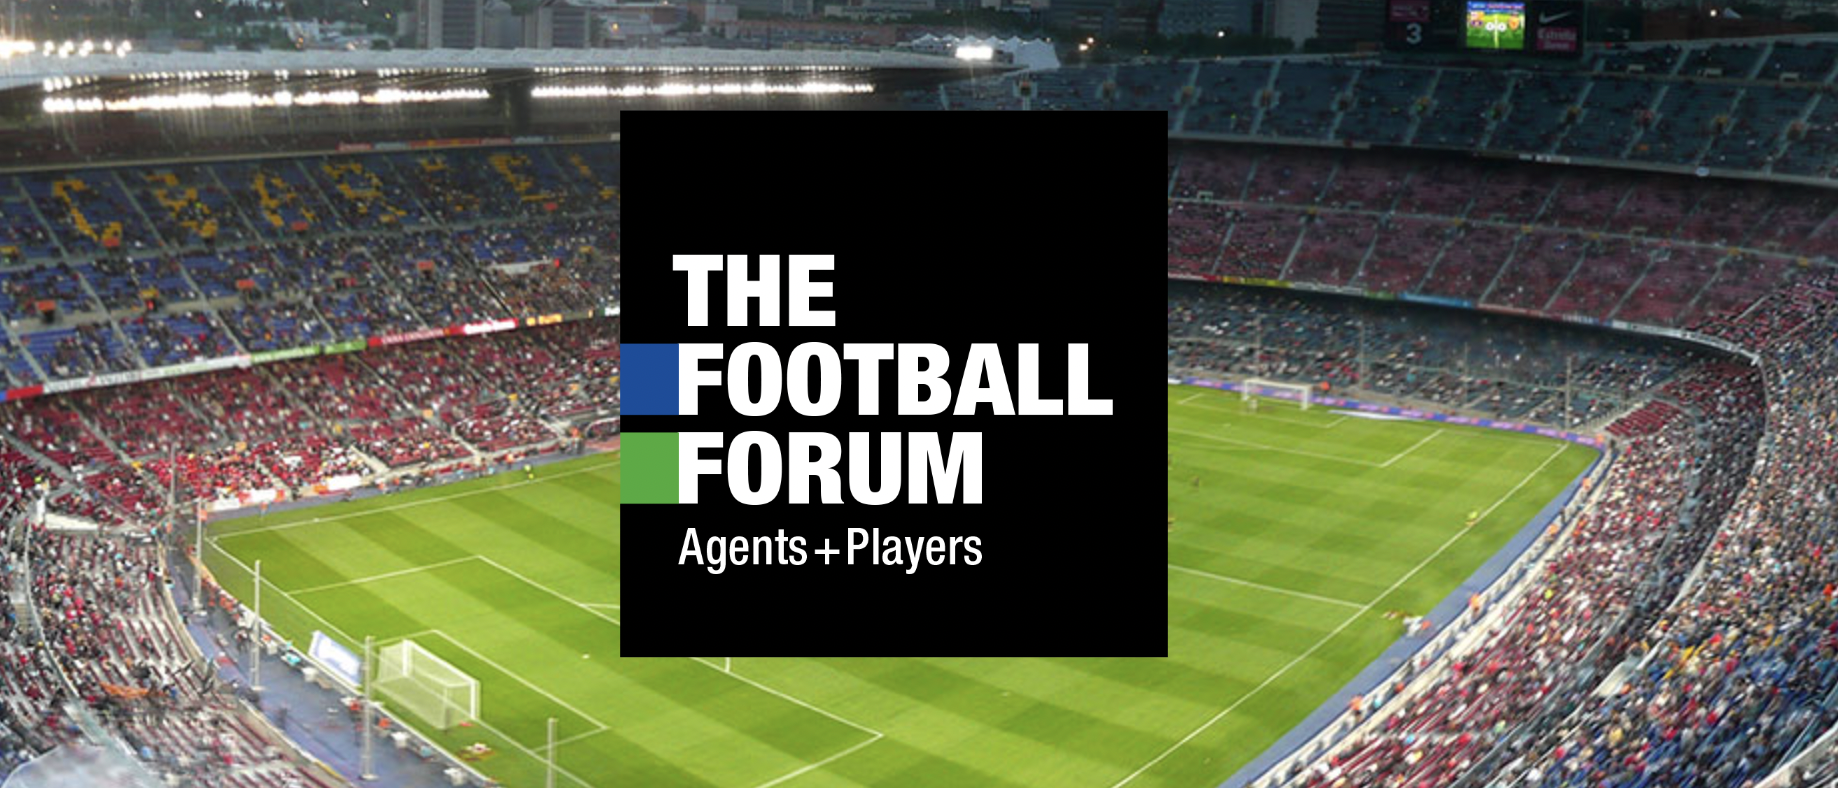 The Football Forum claimed the CAS ruling does not apply to its members and states that the regulations need to be ratified by the Court of Justice of the European Union ©TFF